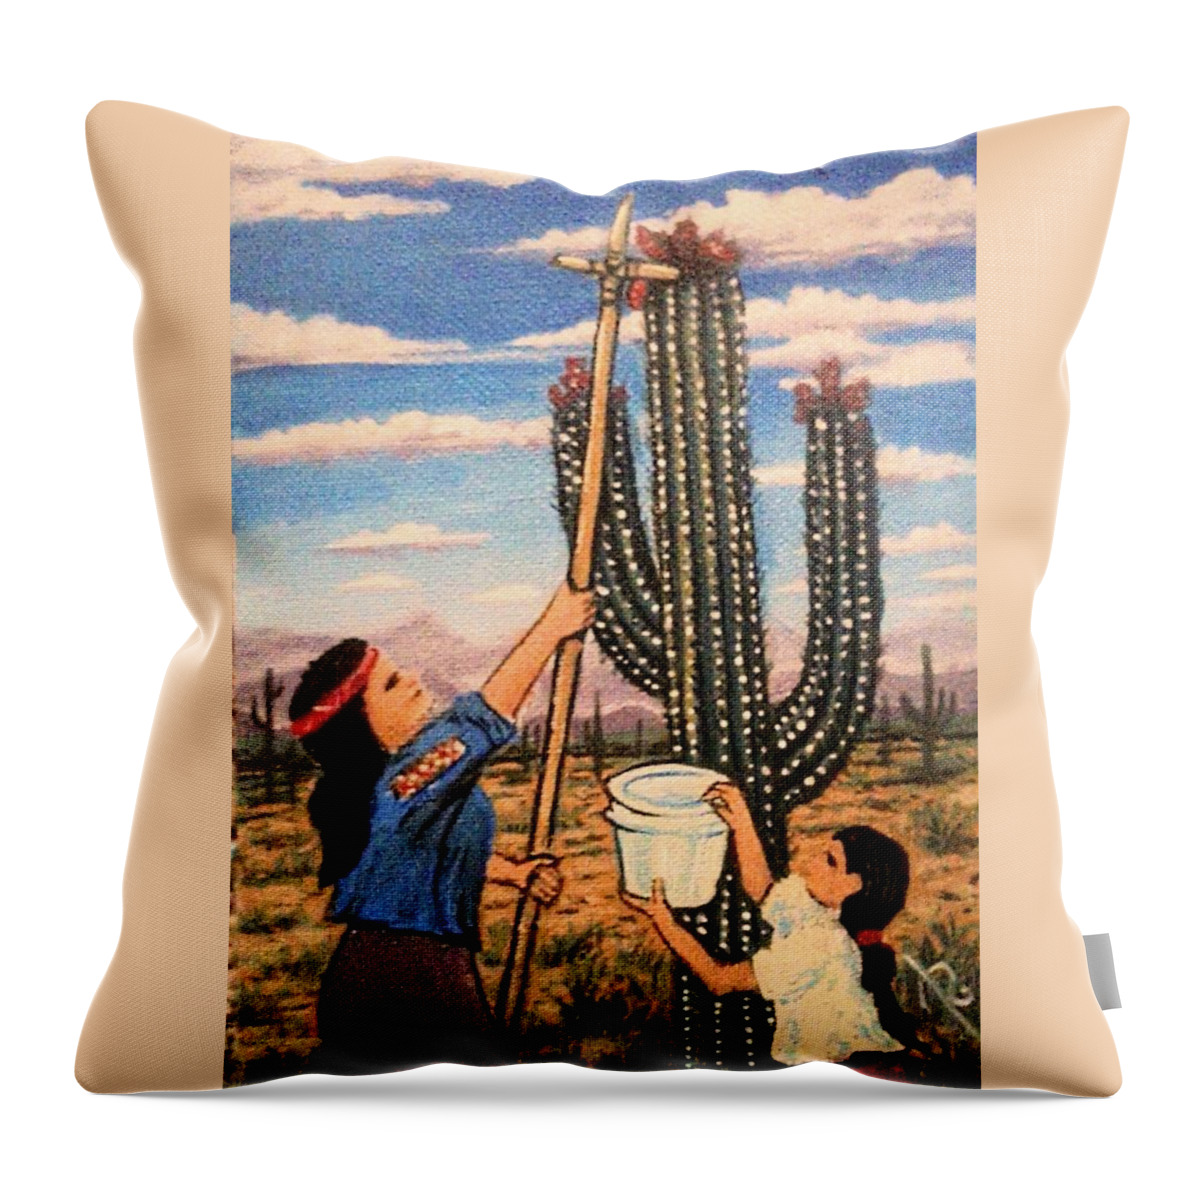  Throw Pillow featuring the painting Harvesting 2 by James RODERICK